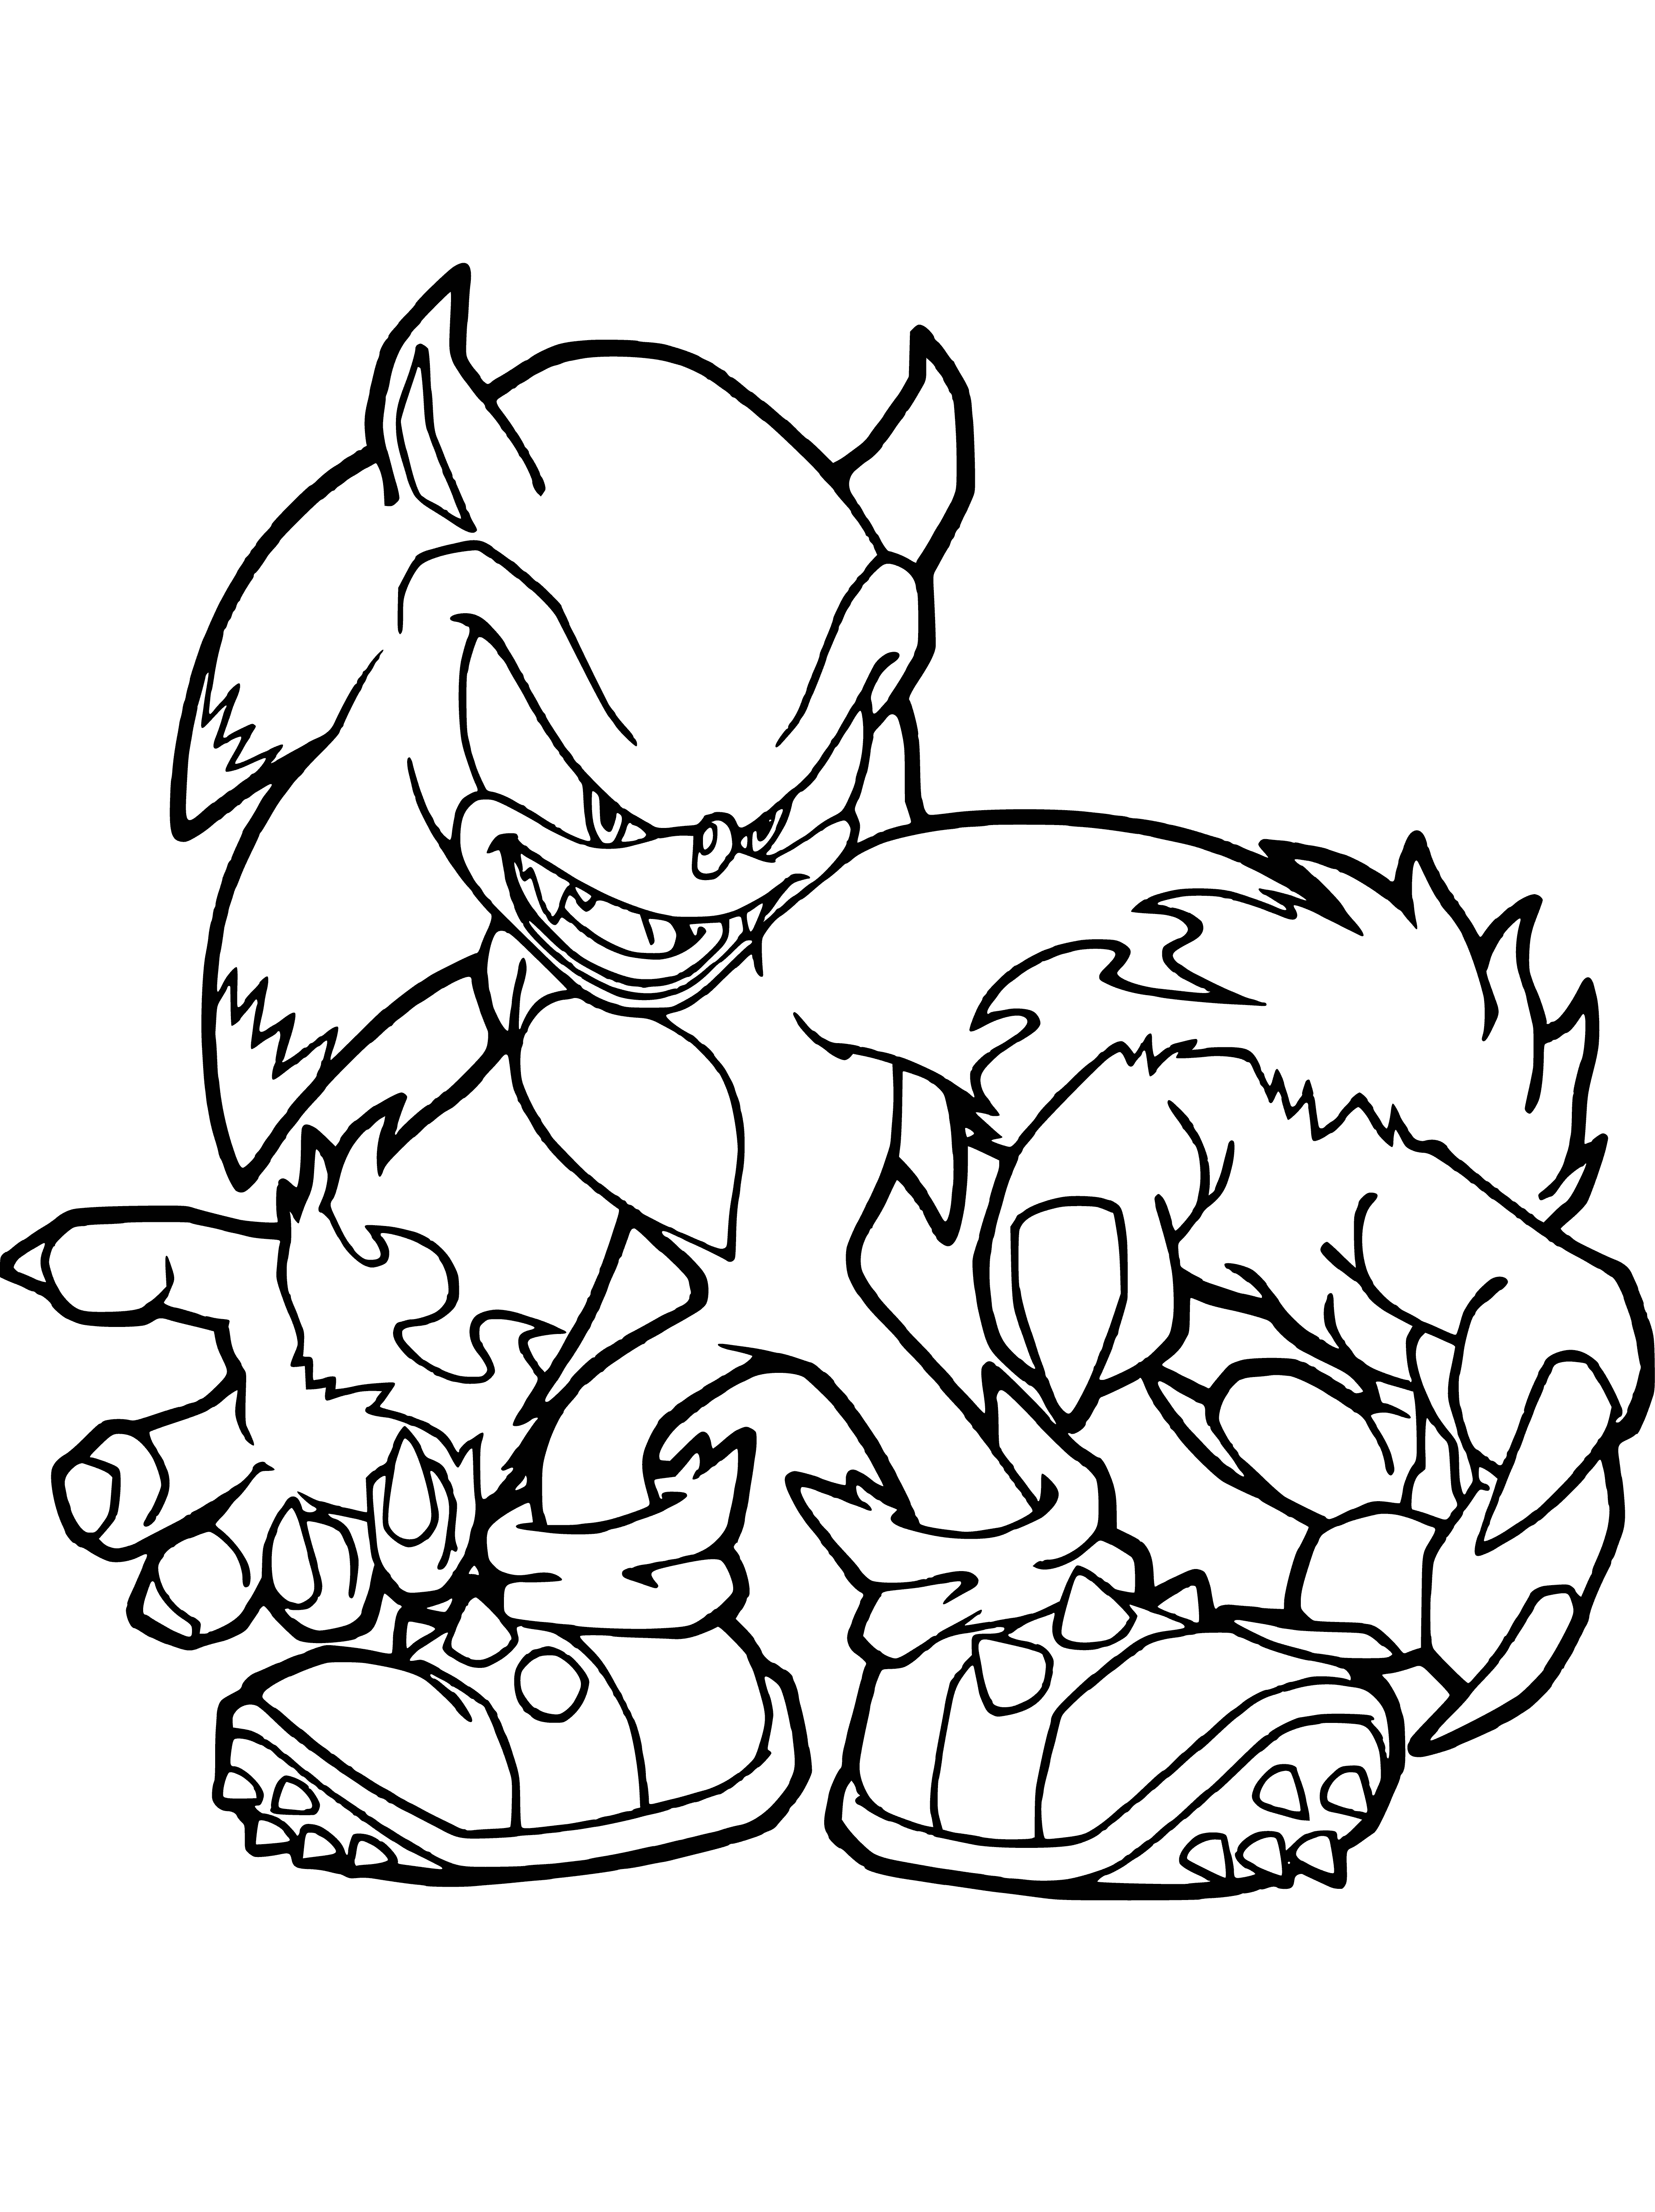 coloring page: Sonic the Hedgehog is racing at high speeds through a circular loop, blue with white gloves and shoes and serious expression. Quills point backwards.